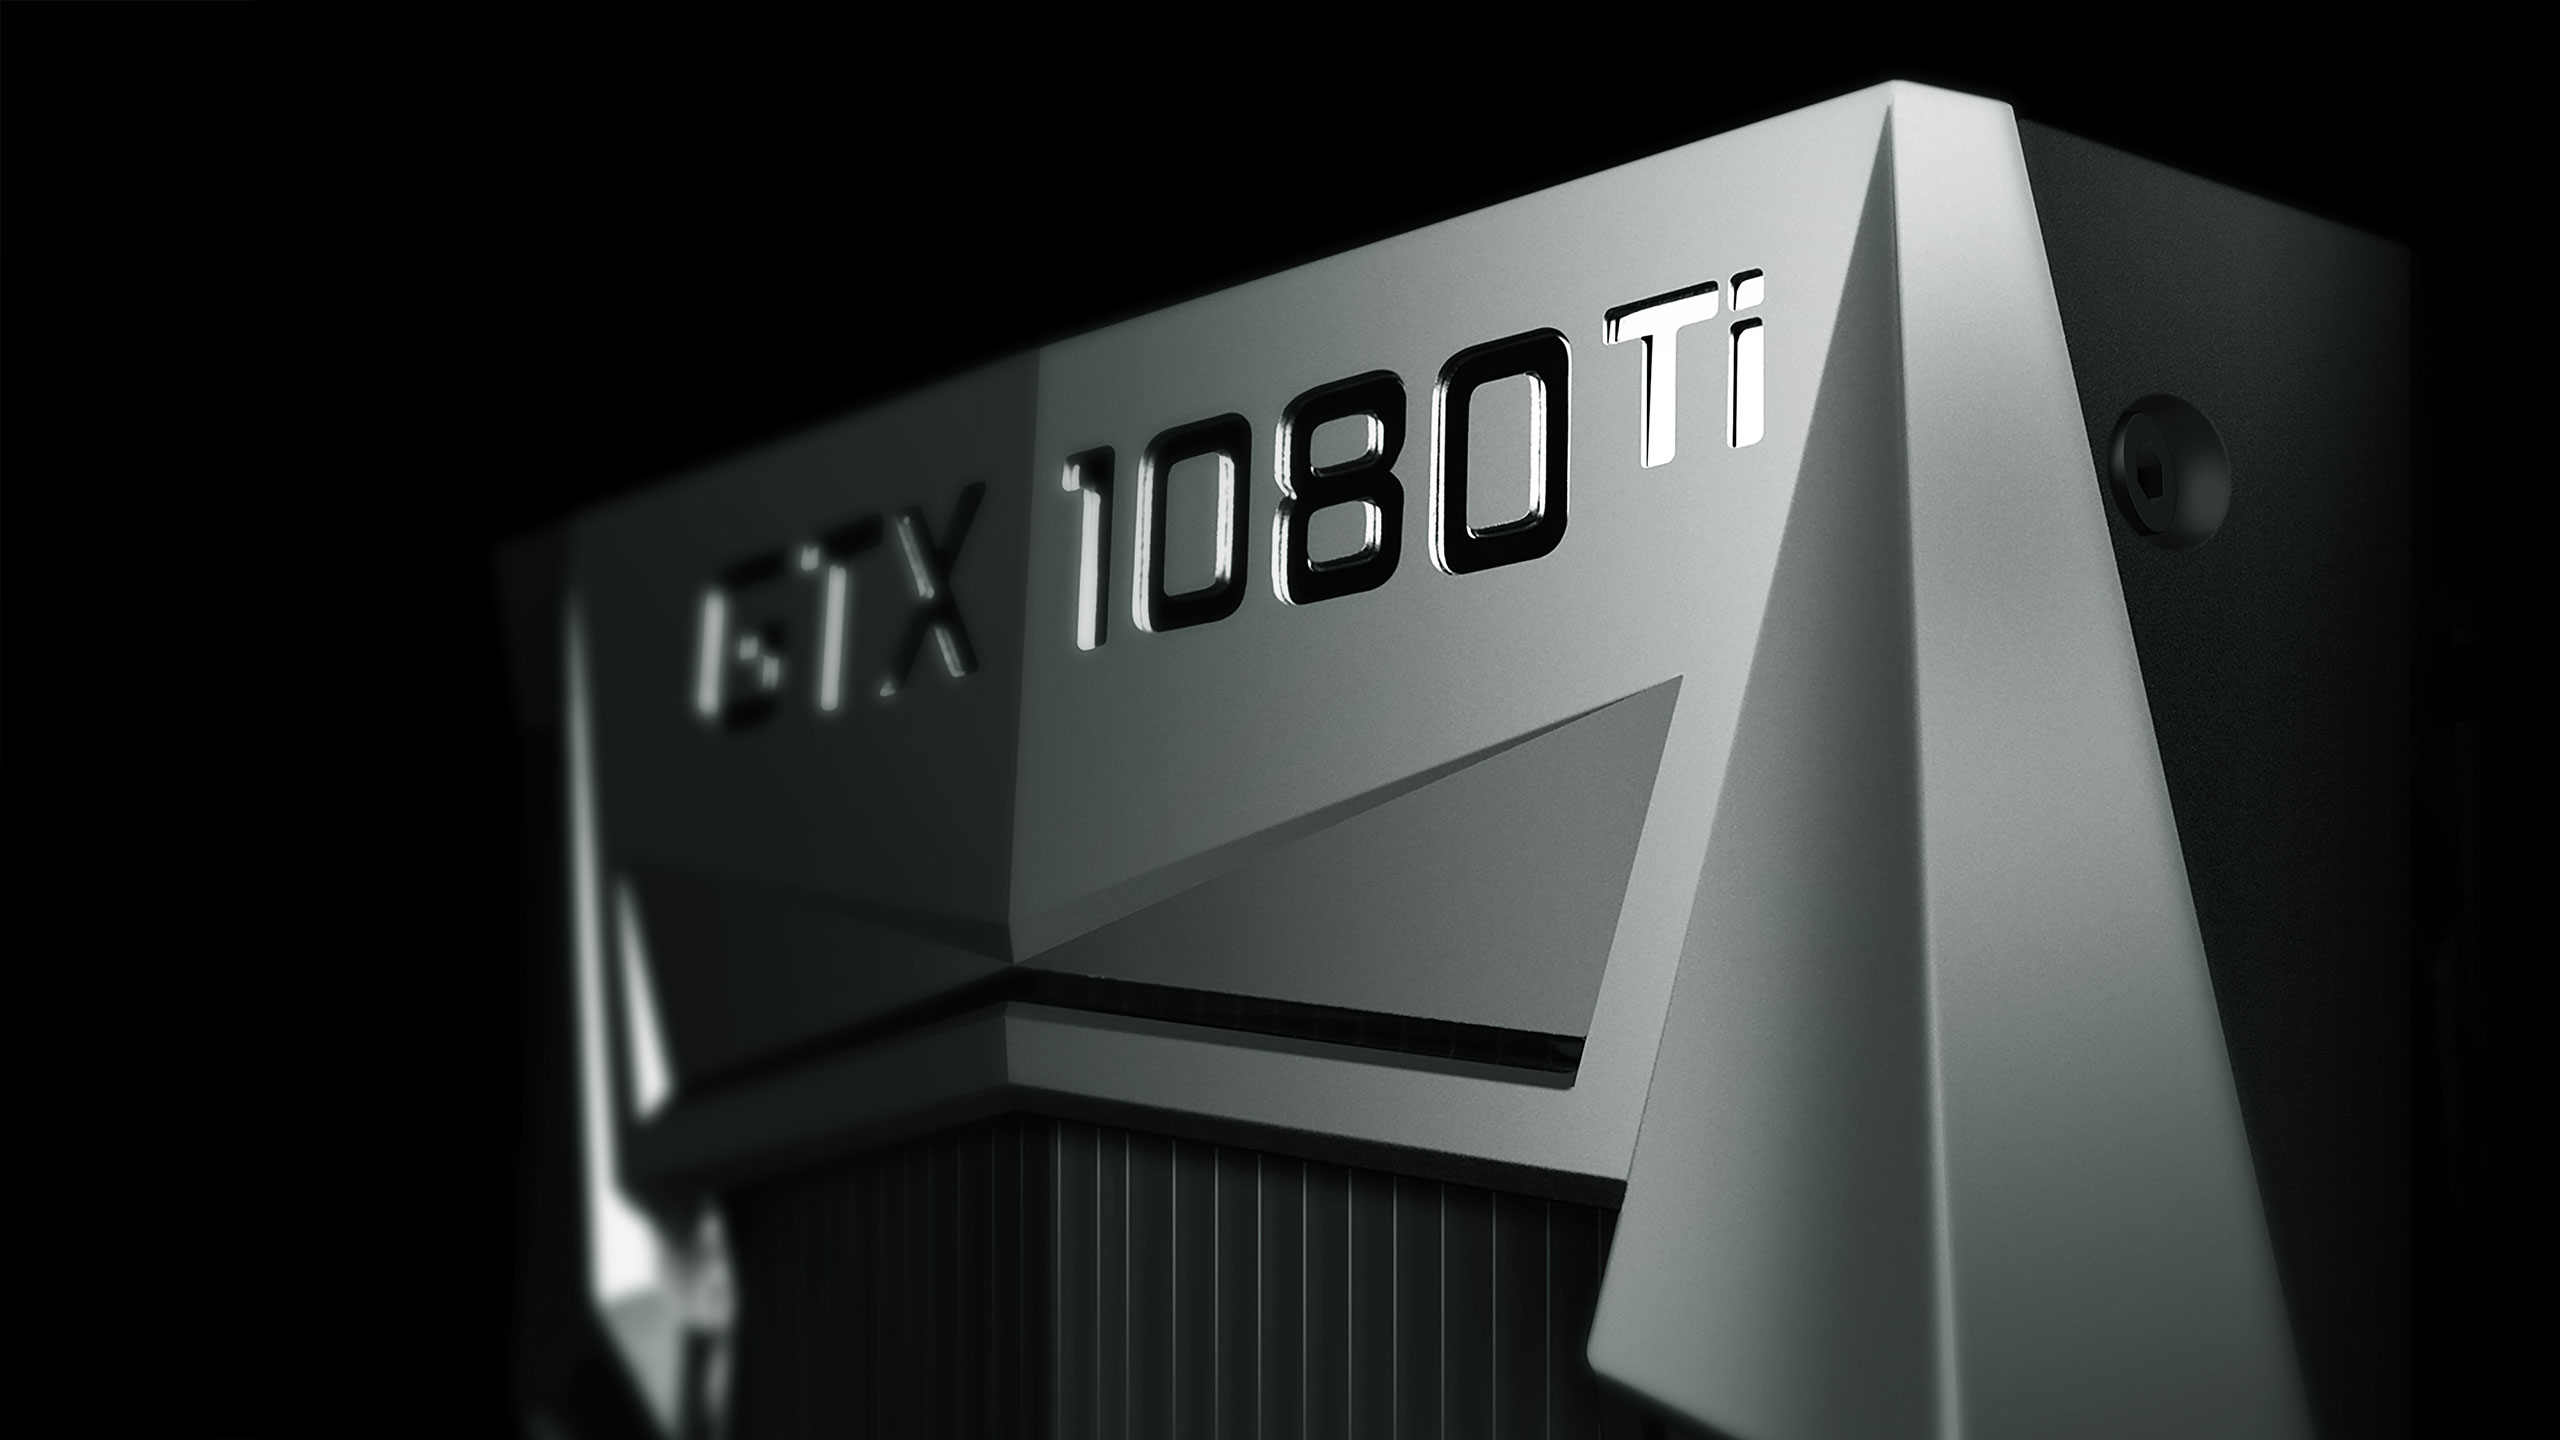 Nvidia's GeForce GTX 1080 Ti is finally here